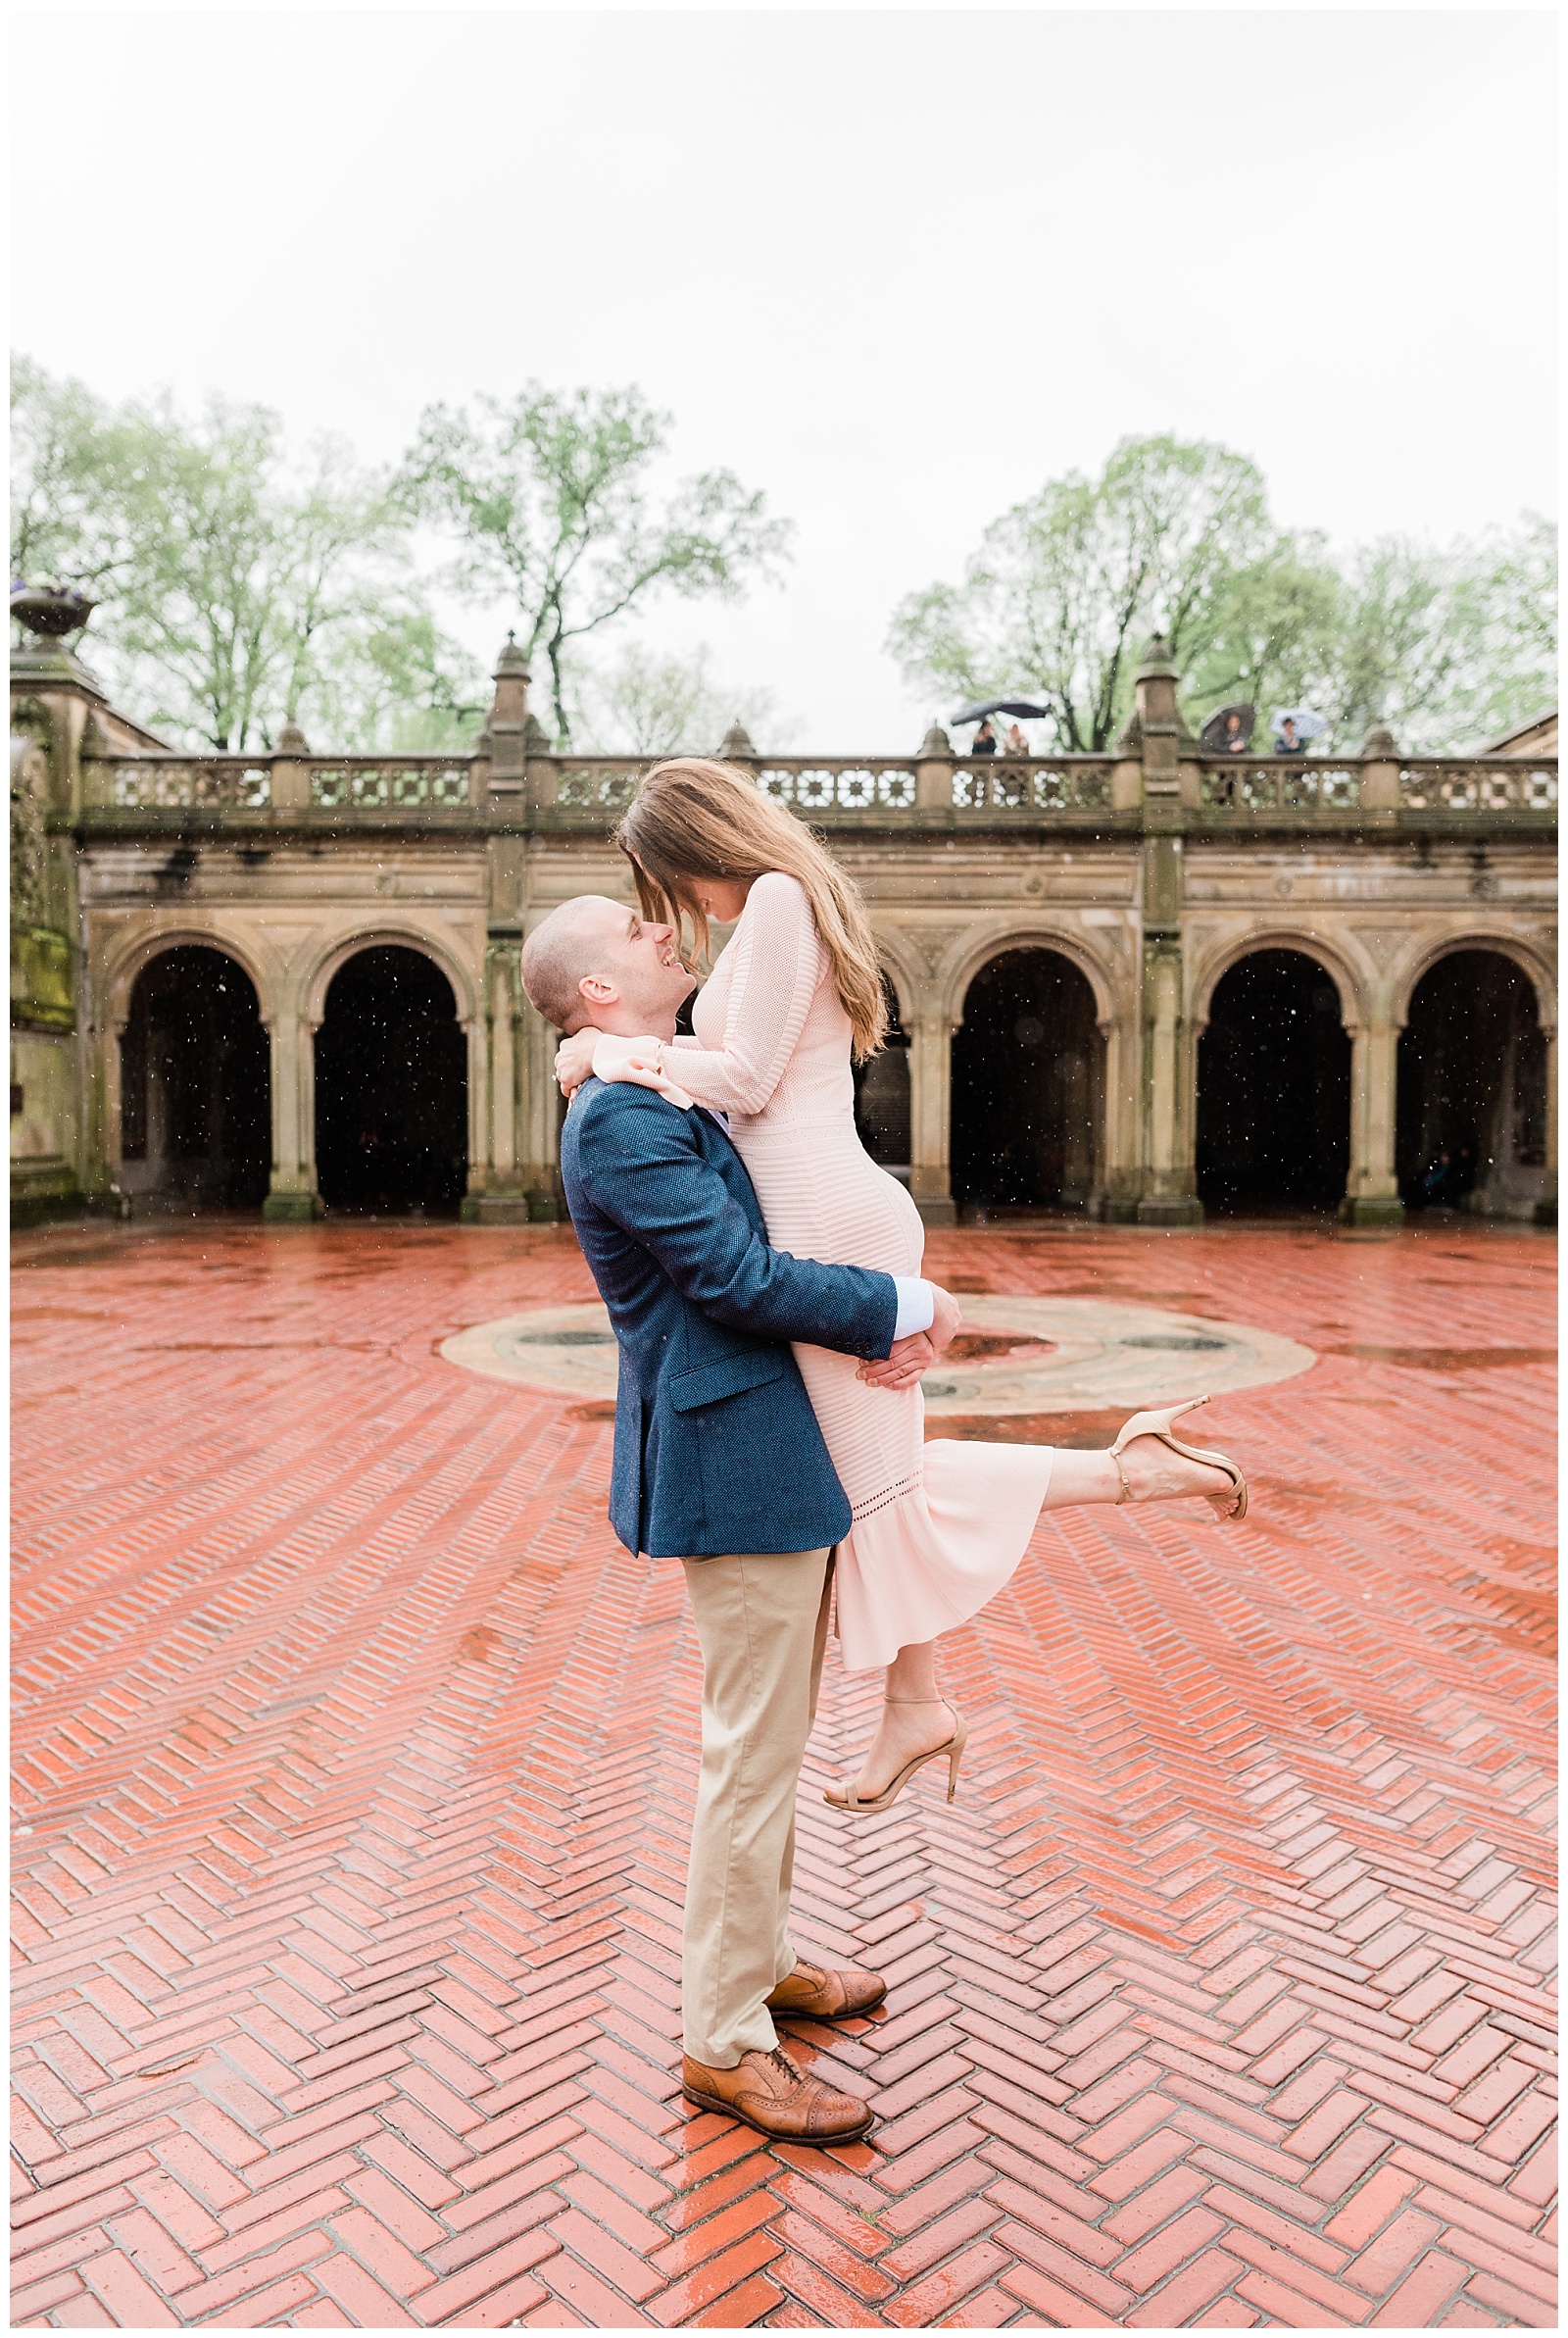 A man lifts up his fiancee in front of Bethesda Terrace in the rain.